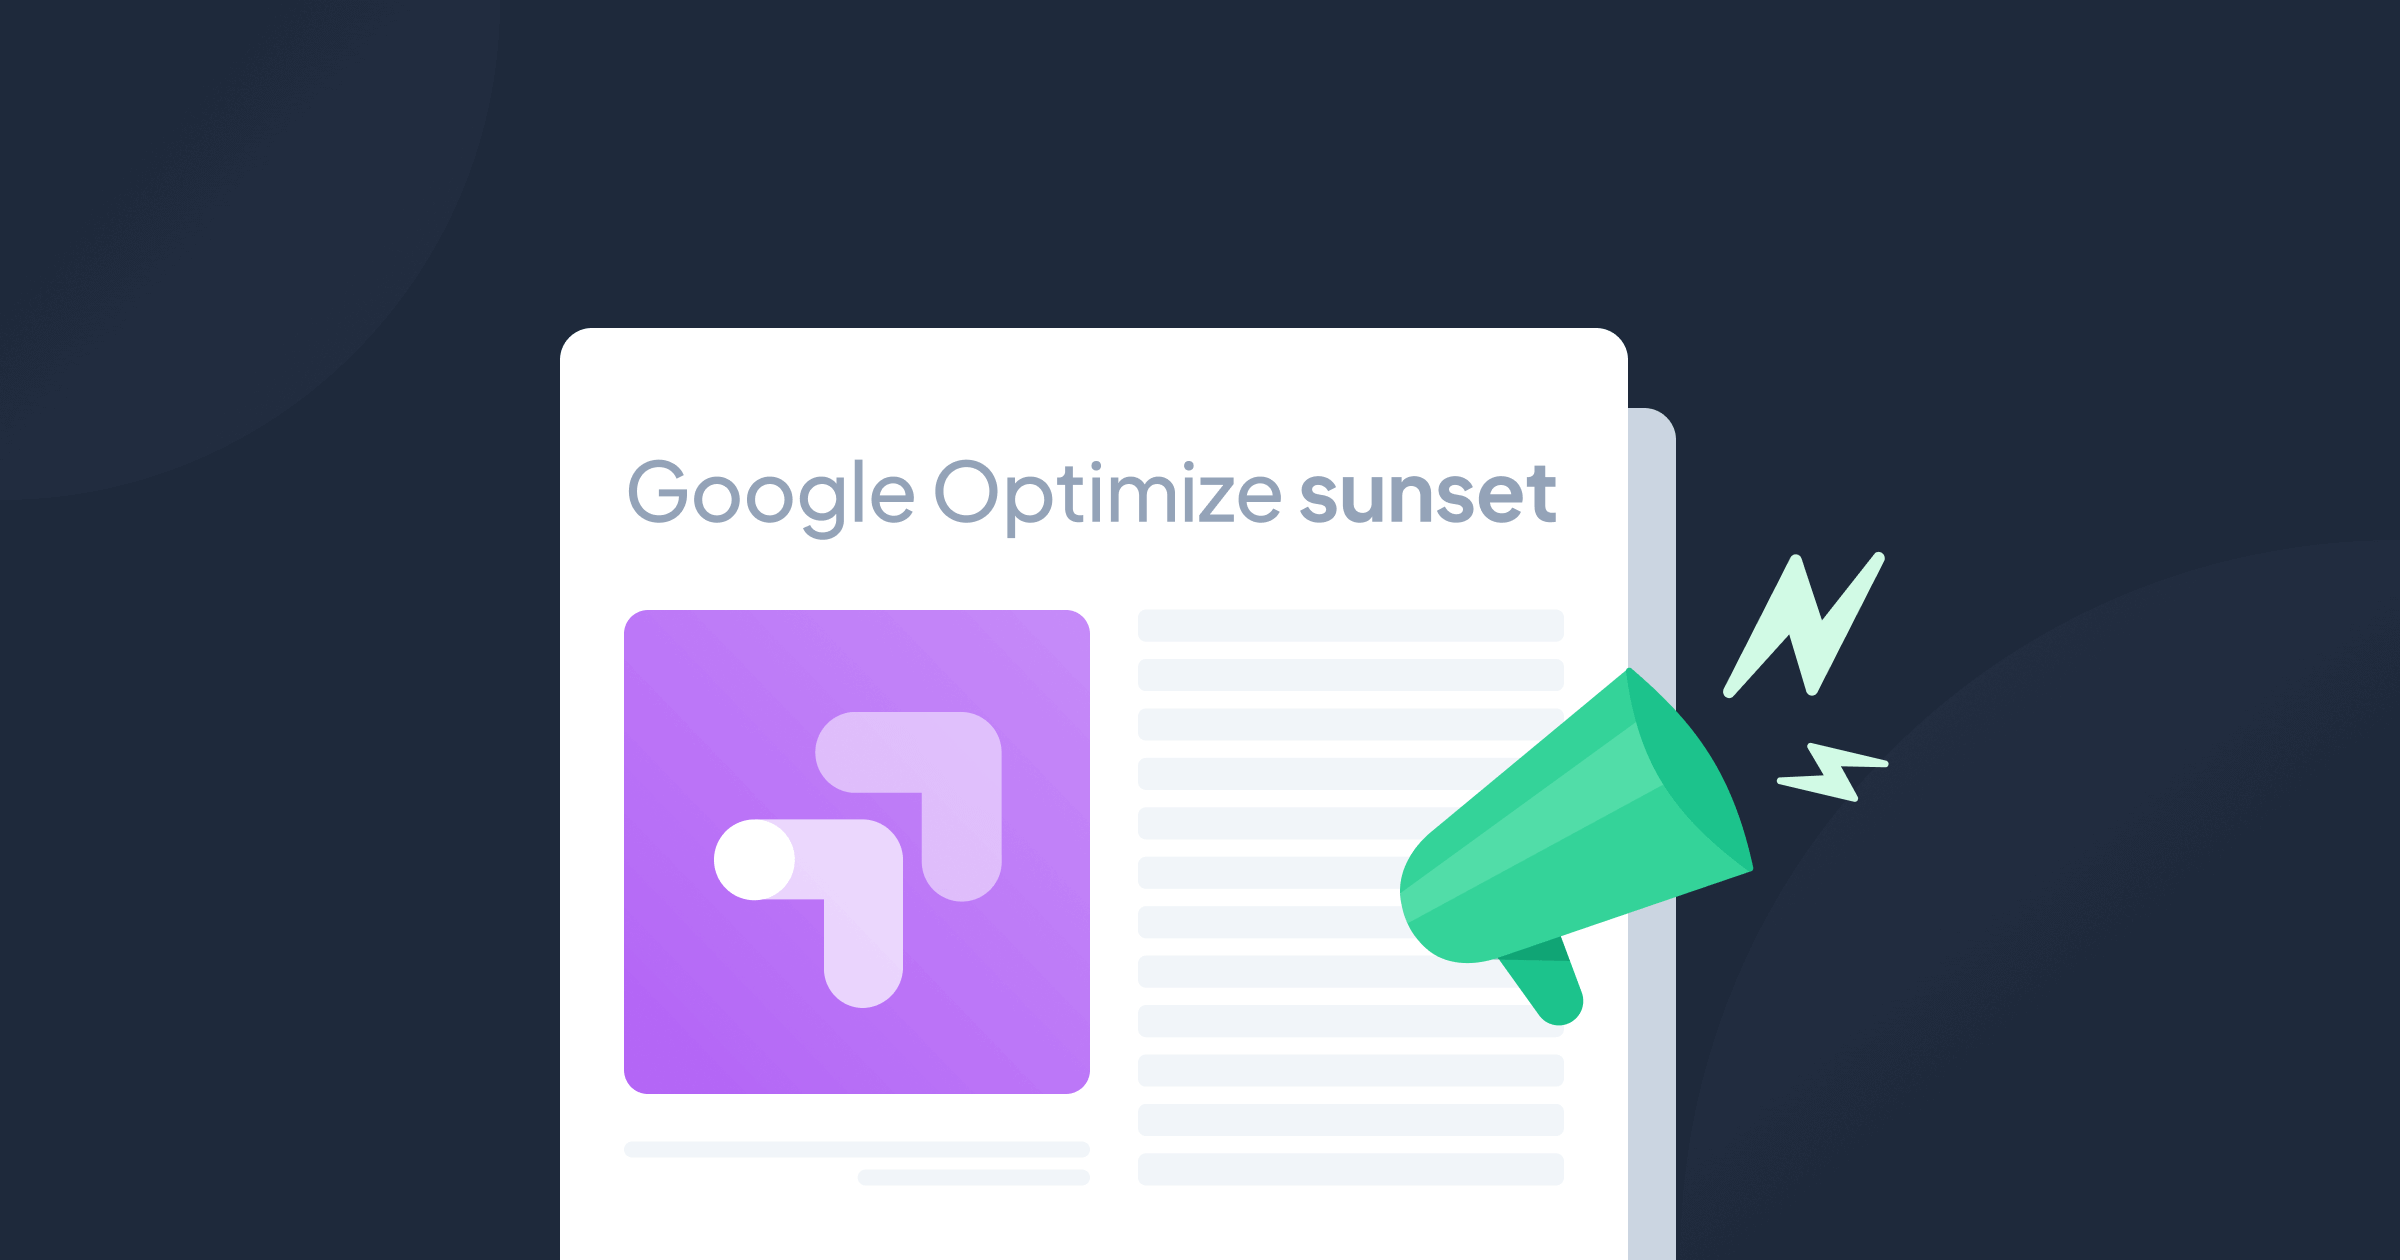 Newspaper with Google Optimize's logo, a speaker and text that reads "Google Optimize sunset"